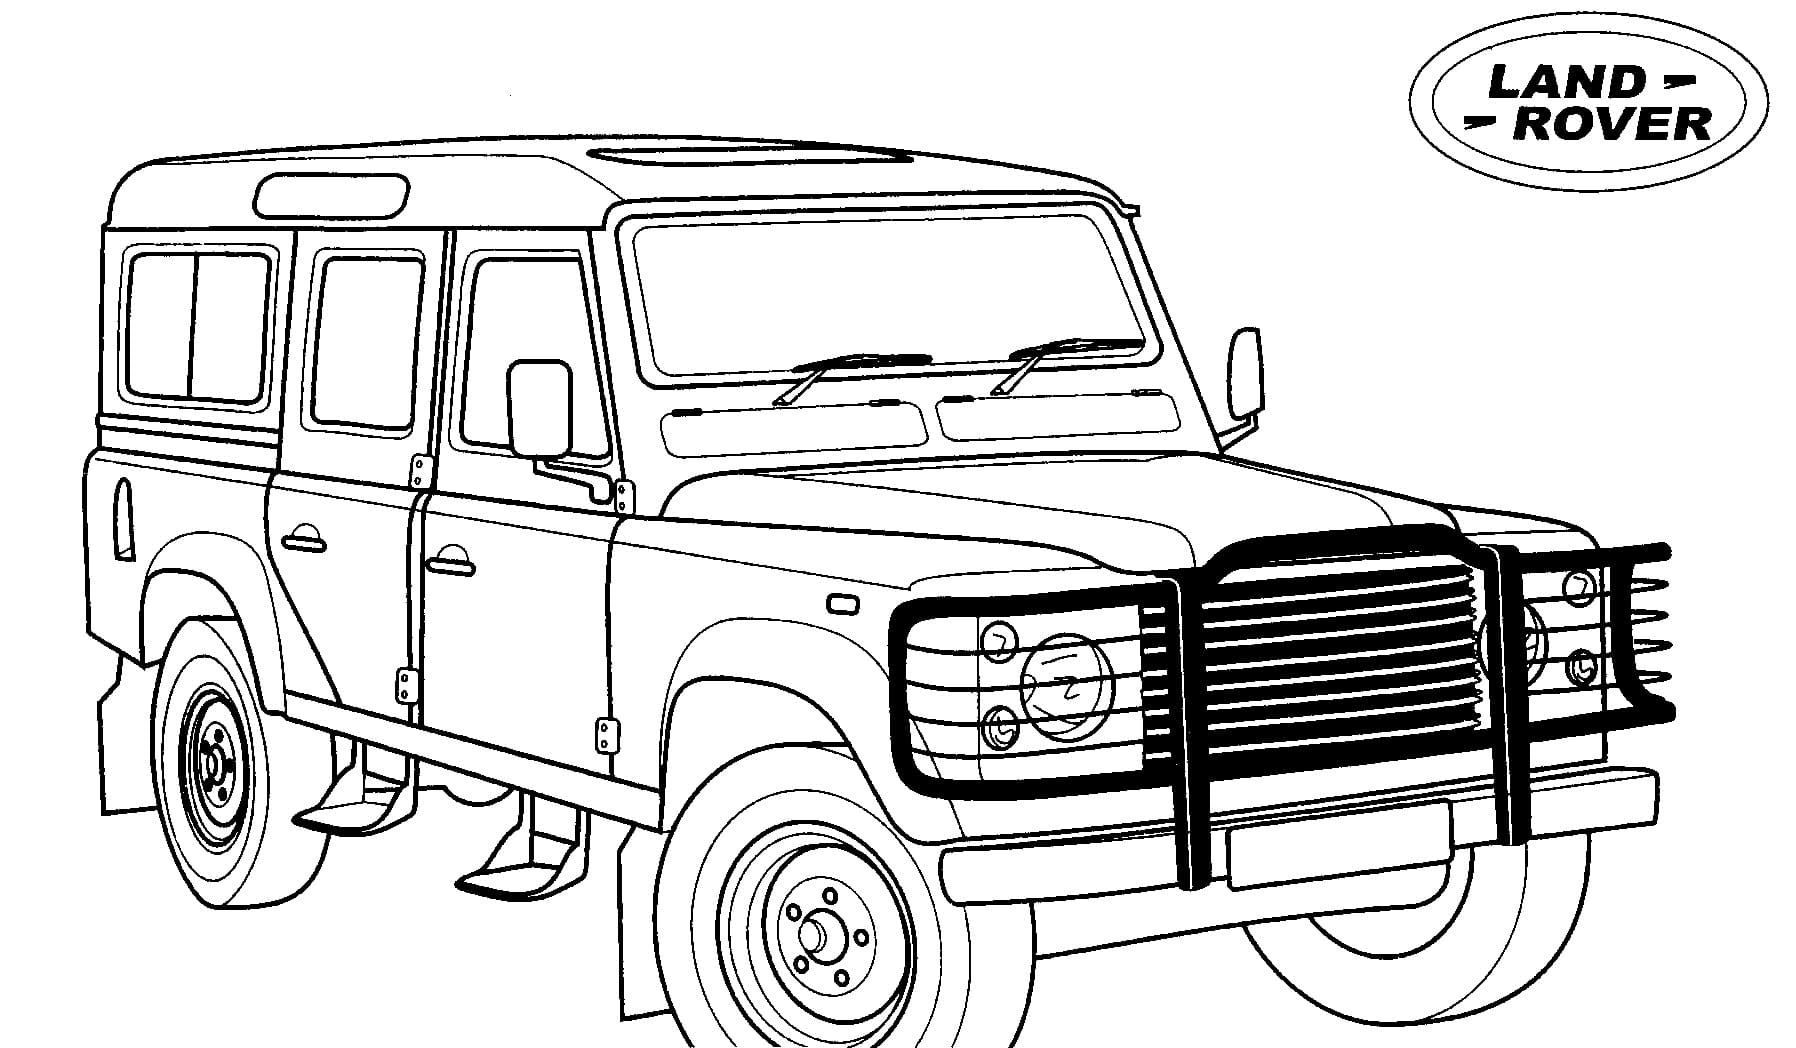 Landrover 4×4 coloring page